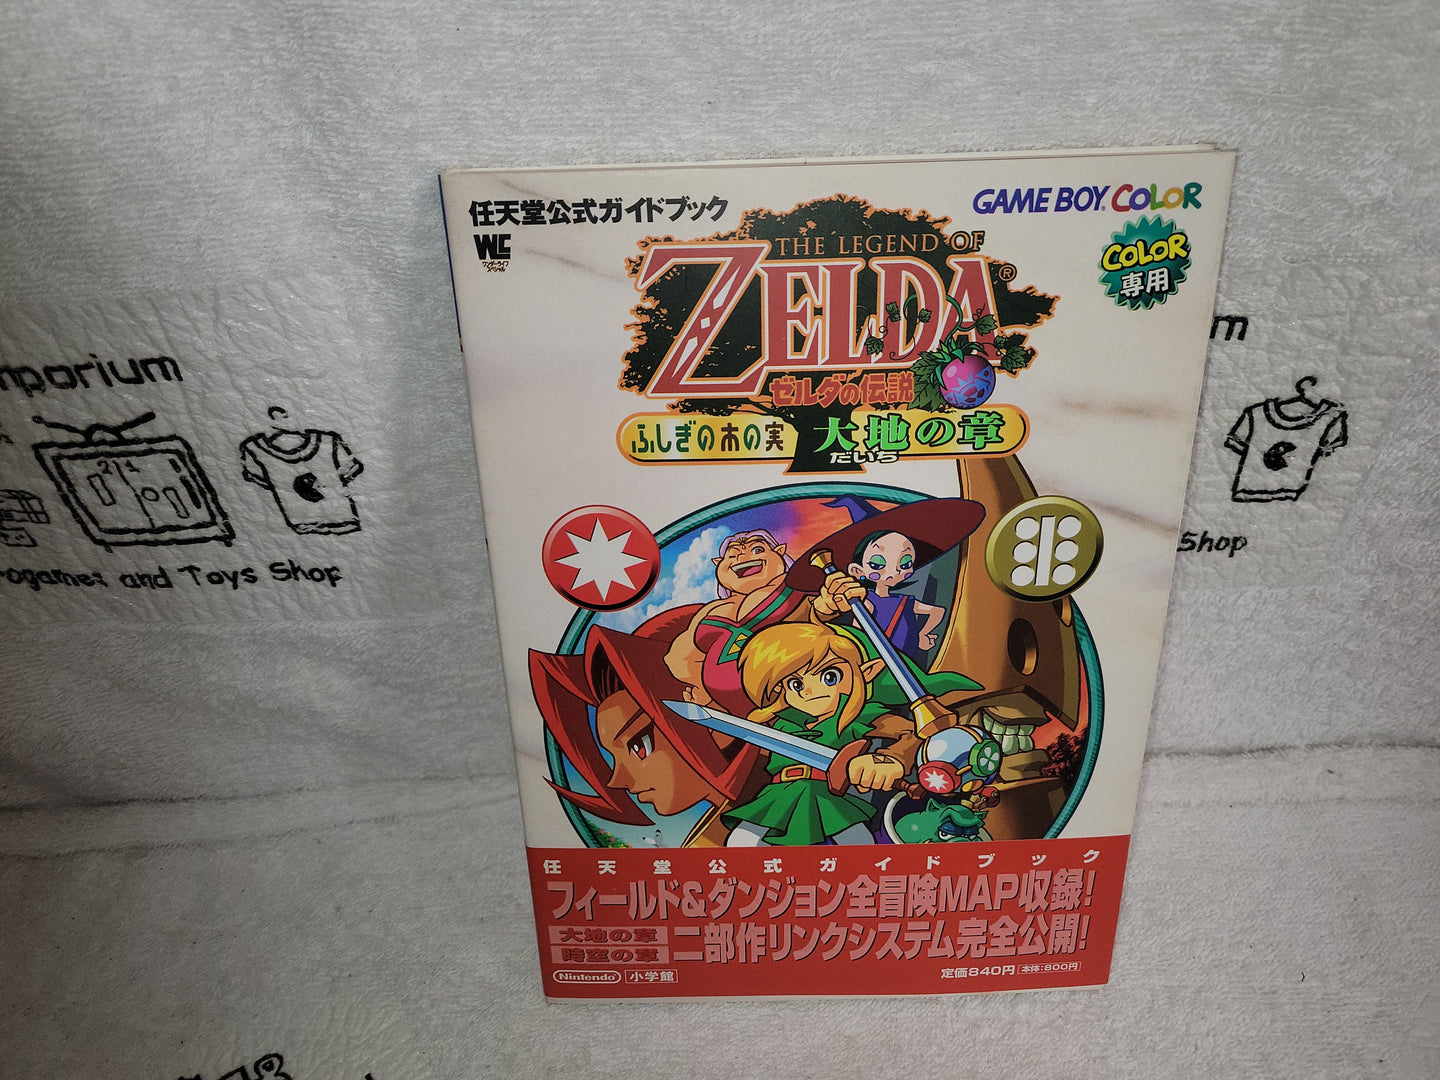 The Legend of Zelda: Oracle of Seasons and The Legend of Zelda: Oracle of Ages guide book